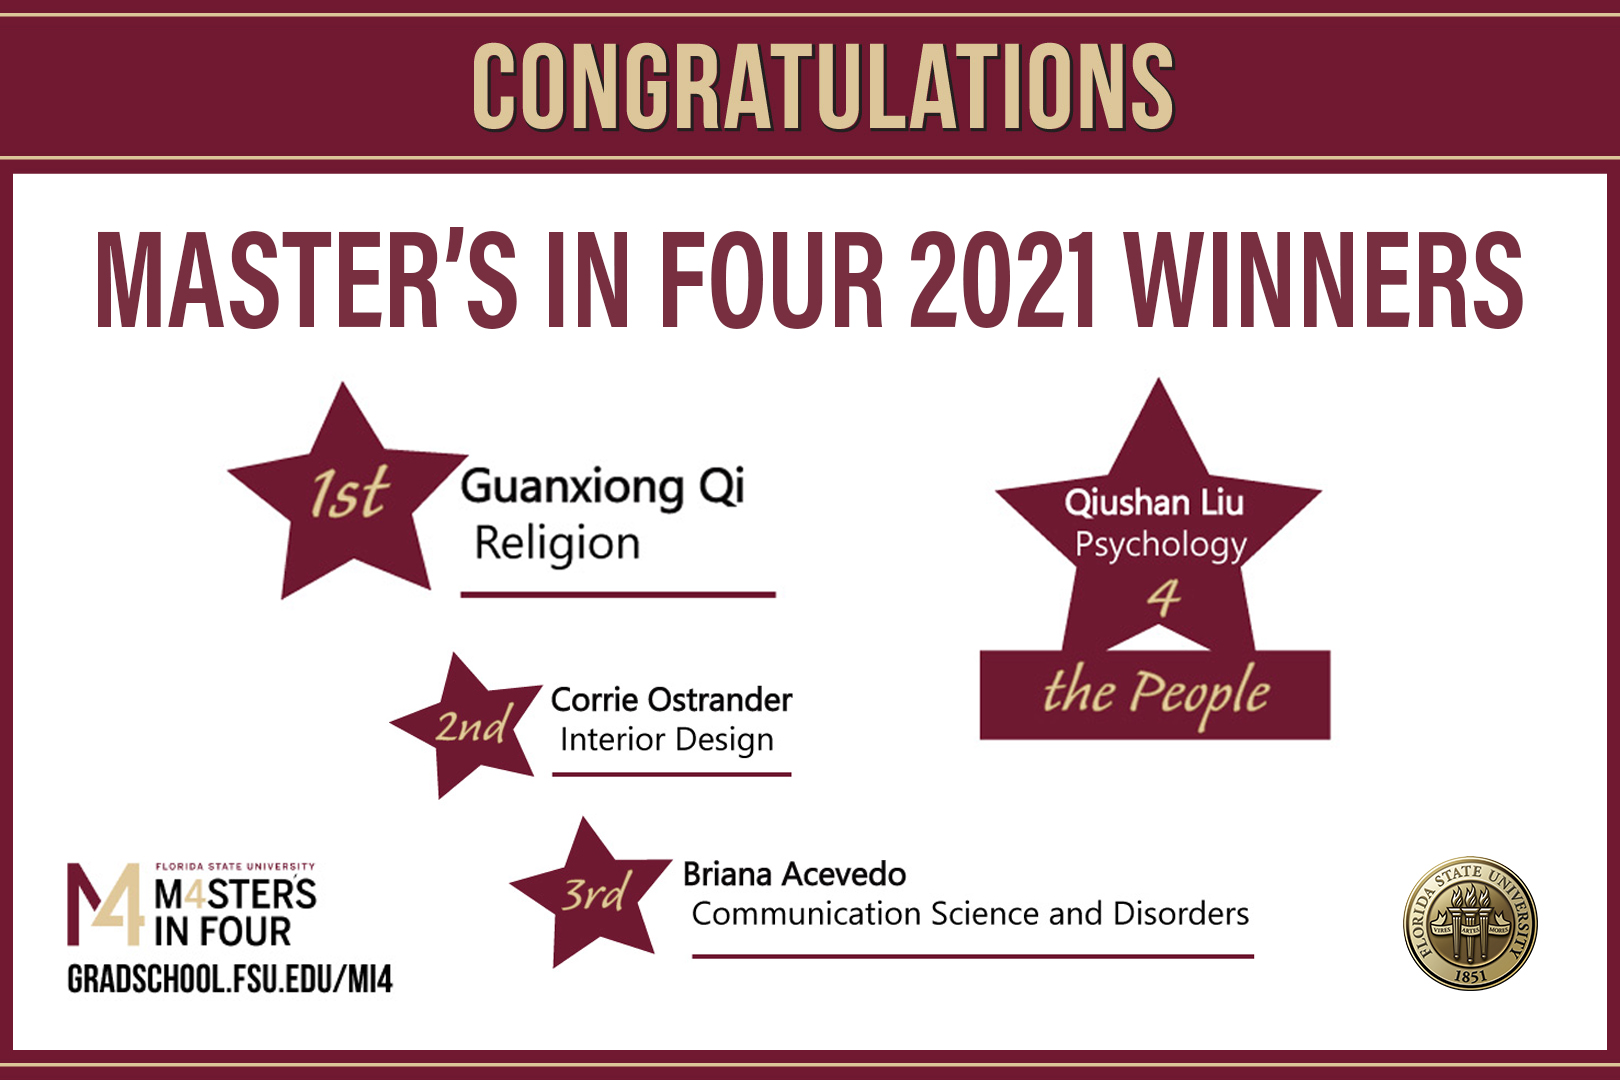 Master's in Four 2021 Winners